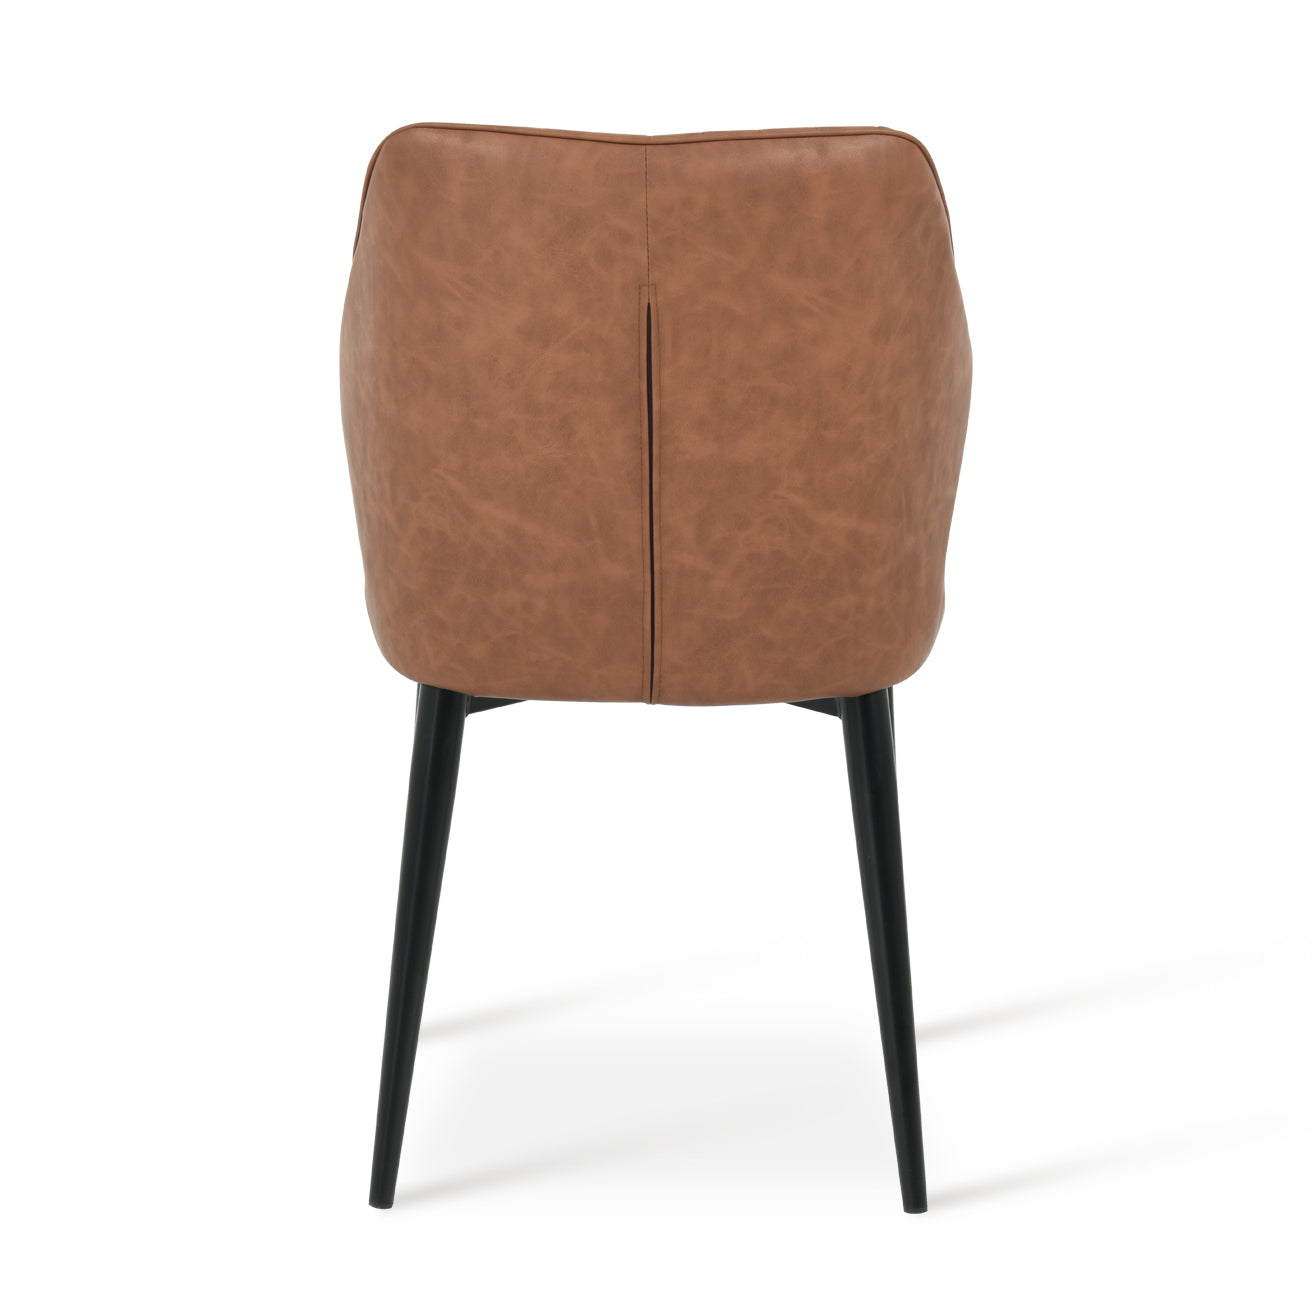 Aleena Dining Chairs [Set of 2] [Pu Leather]